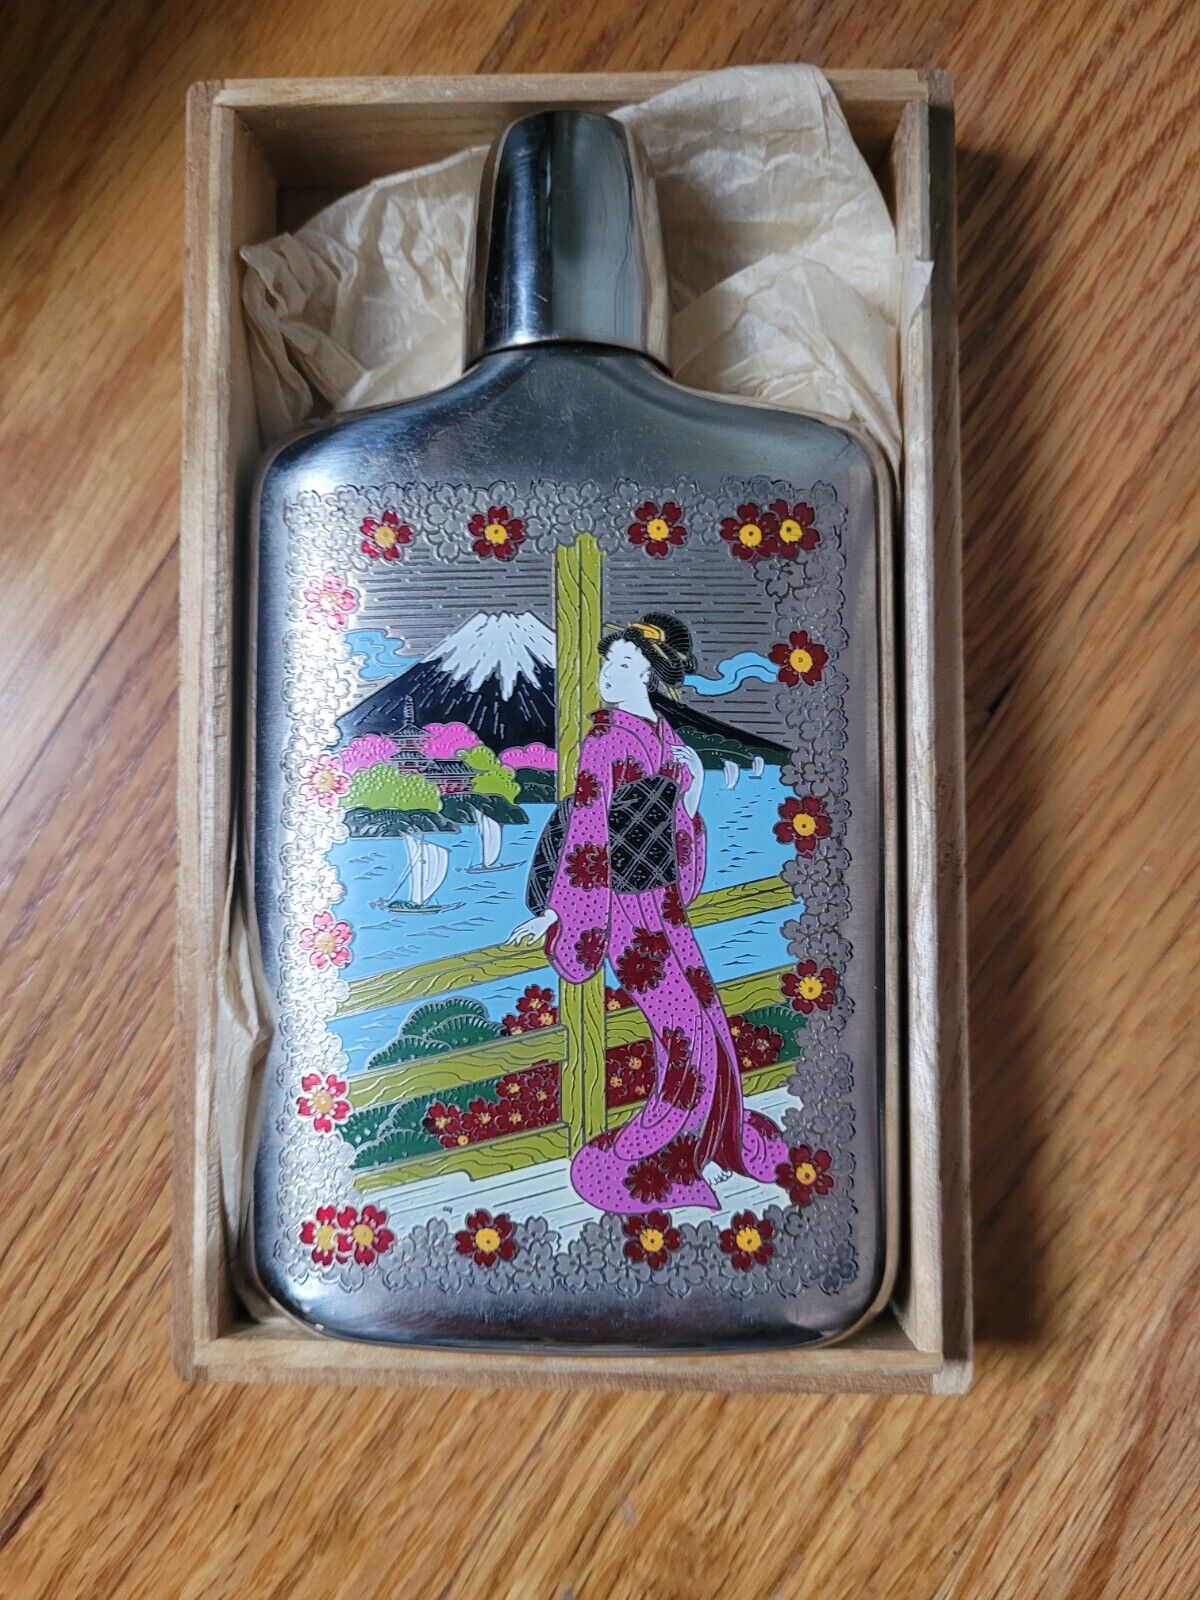 Engraved flask with Geisha Girl and Mount Fuji in background